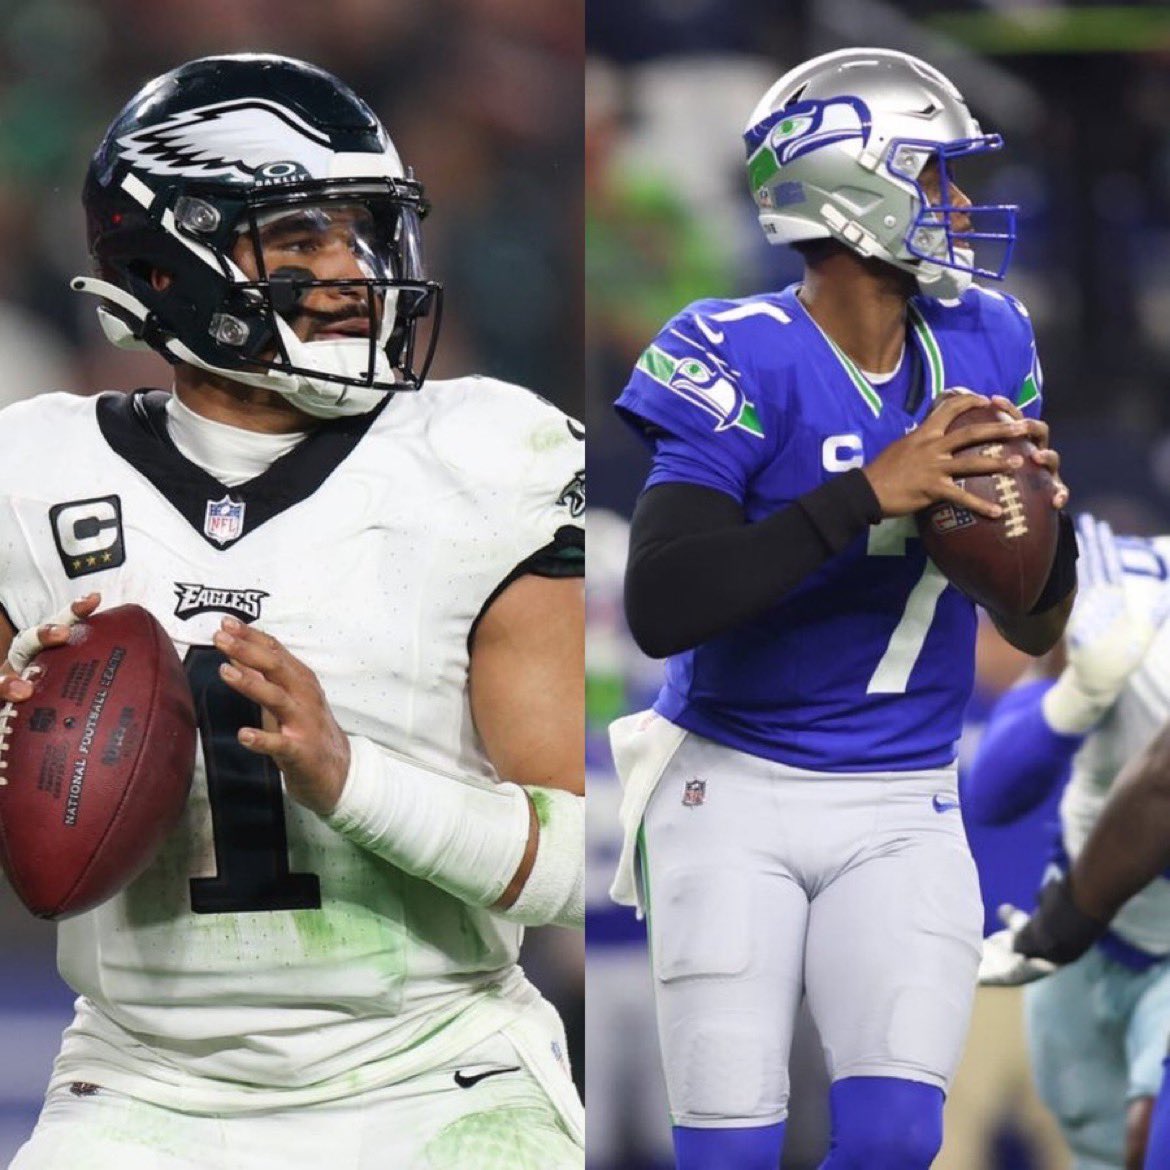 UNDERRATED: #Seahawks Geno Smith stats in the last 2 seasons 7,906 passing yards 50 passing TD’s 20 INT’s 96.8% QBR 67% completion #Eagles Jalen Hurts stats in the last 2 seasons: 7,559 passing yards 45 passing TD’s 21 INT’s 94.8% QBR 66% completion (Via @hawkmania4)